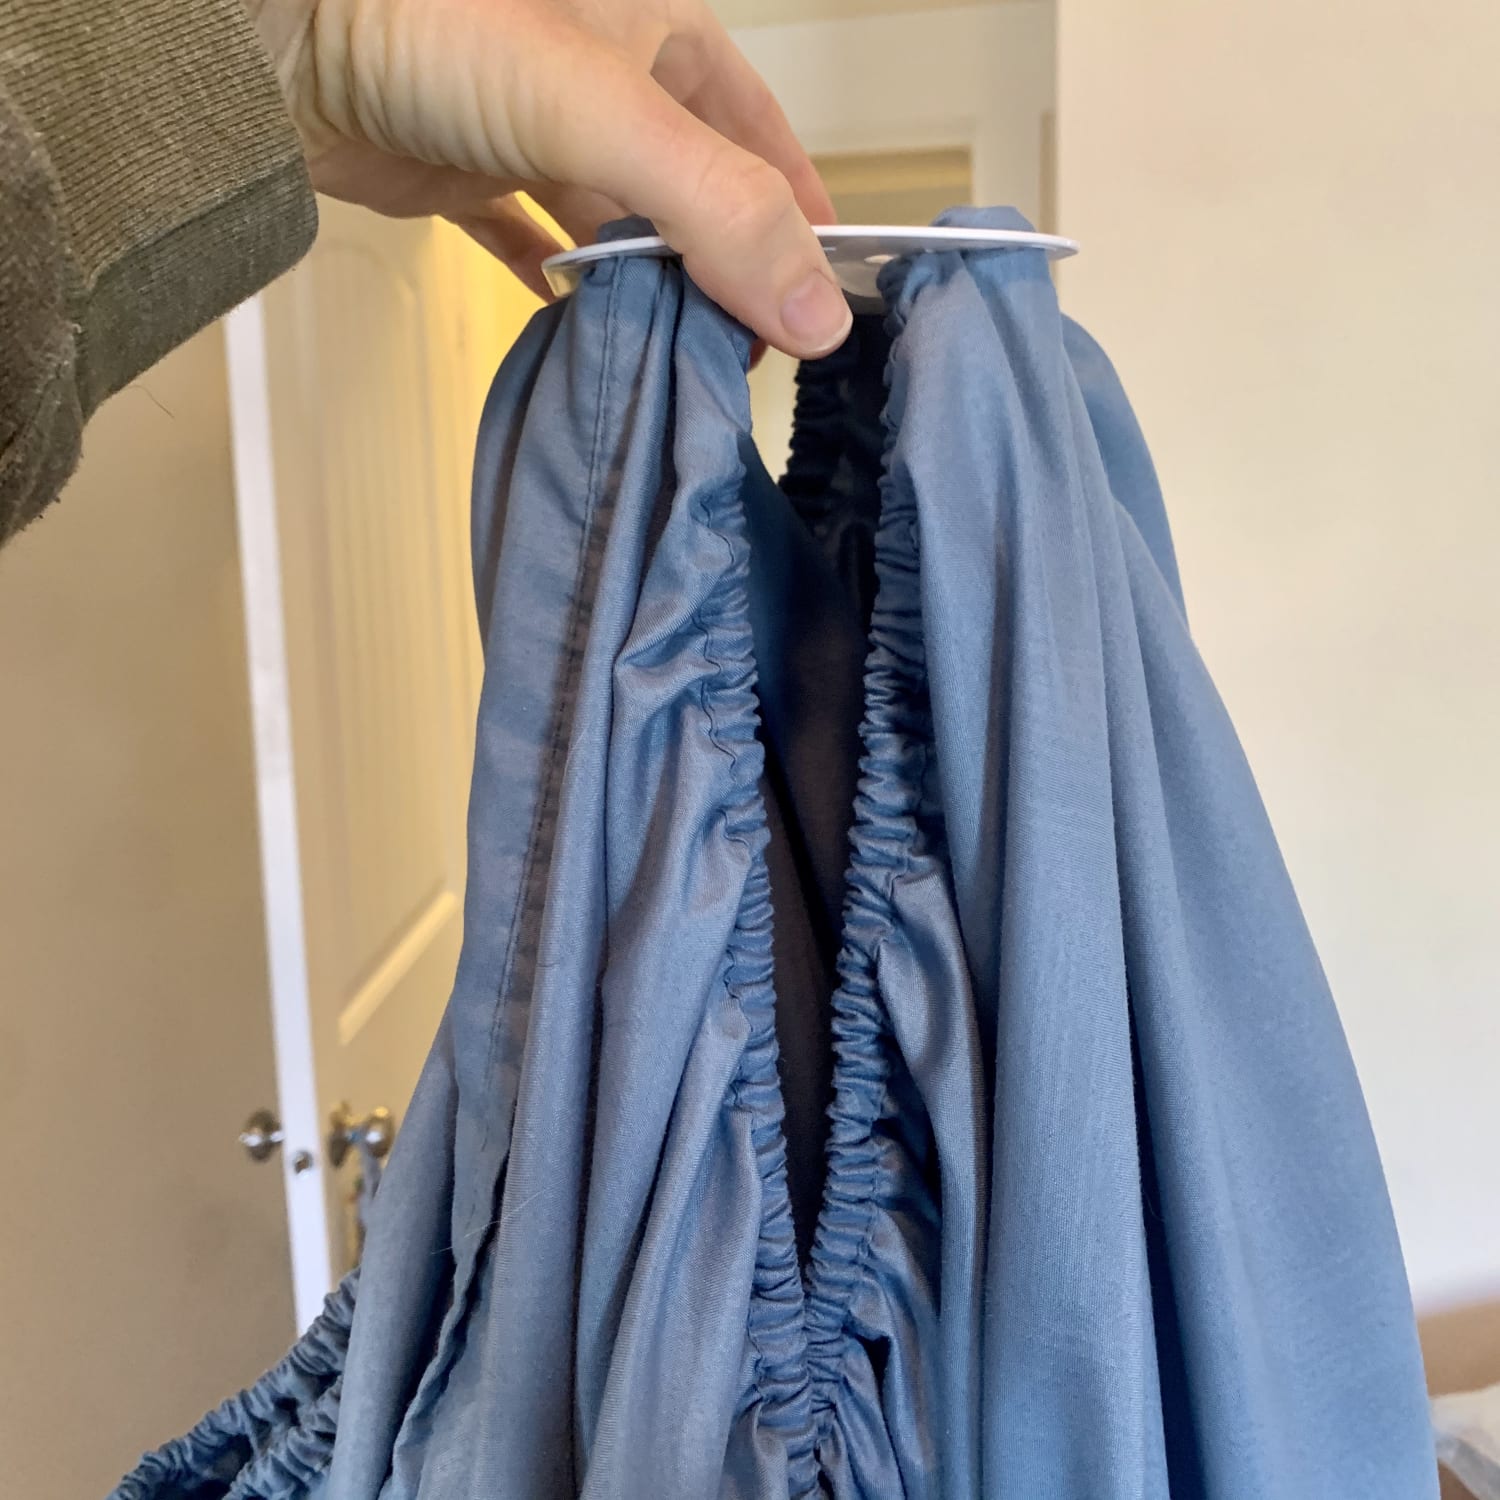 I Tried Wad-Free for Bed Sheets, and It Made Washing So Much Easier